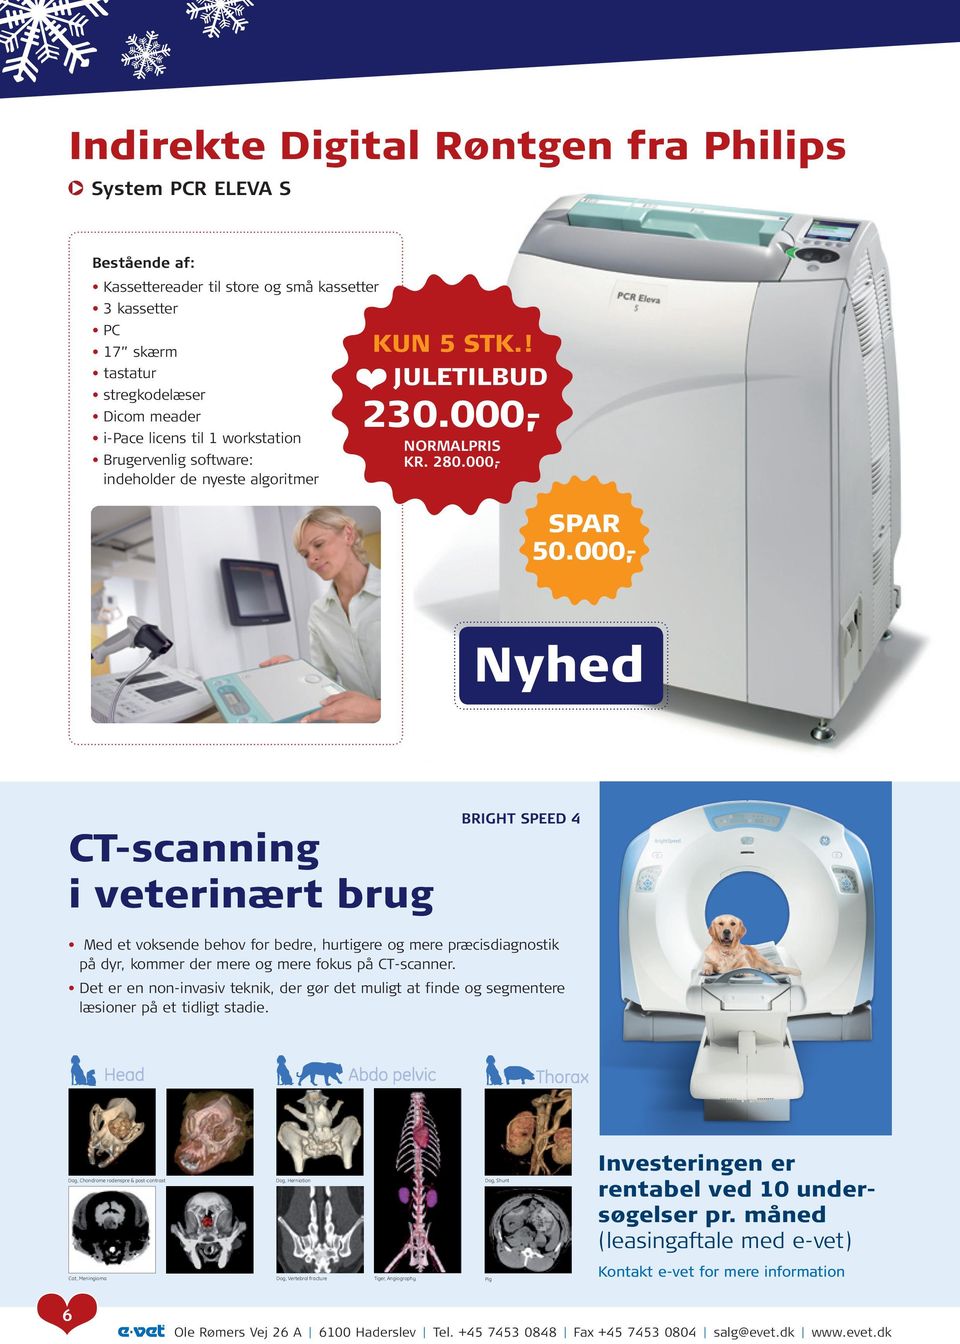 000,- GE Healthcare has confirmed its leadership in CT scanners already for many years and offers a full range of CT systems which respond to your veterinary application needs.